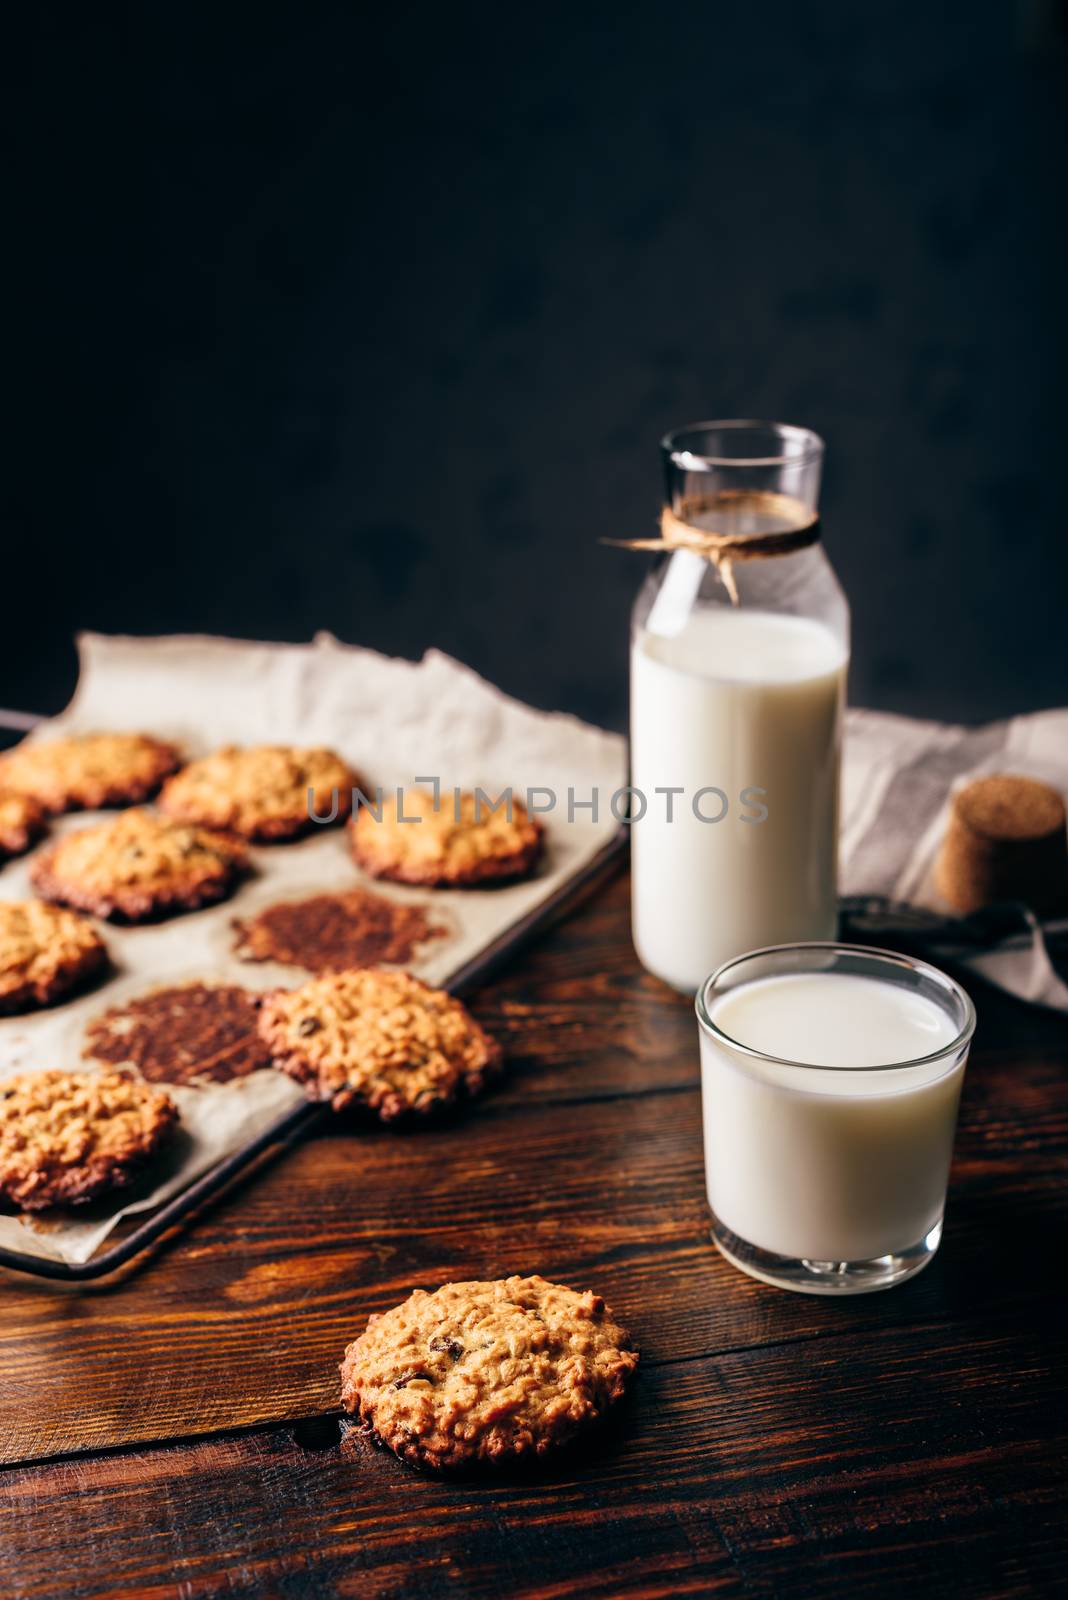 Oatmeal Cookies with Raisins and Glass of Milk for Breakfast. Some Cookies on Parchment Paper with Bottle on Backdrop. Copy Space on the Top.